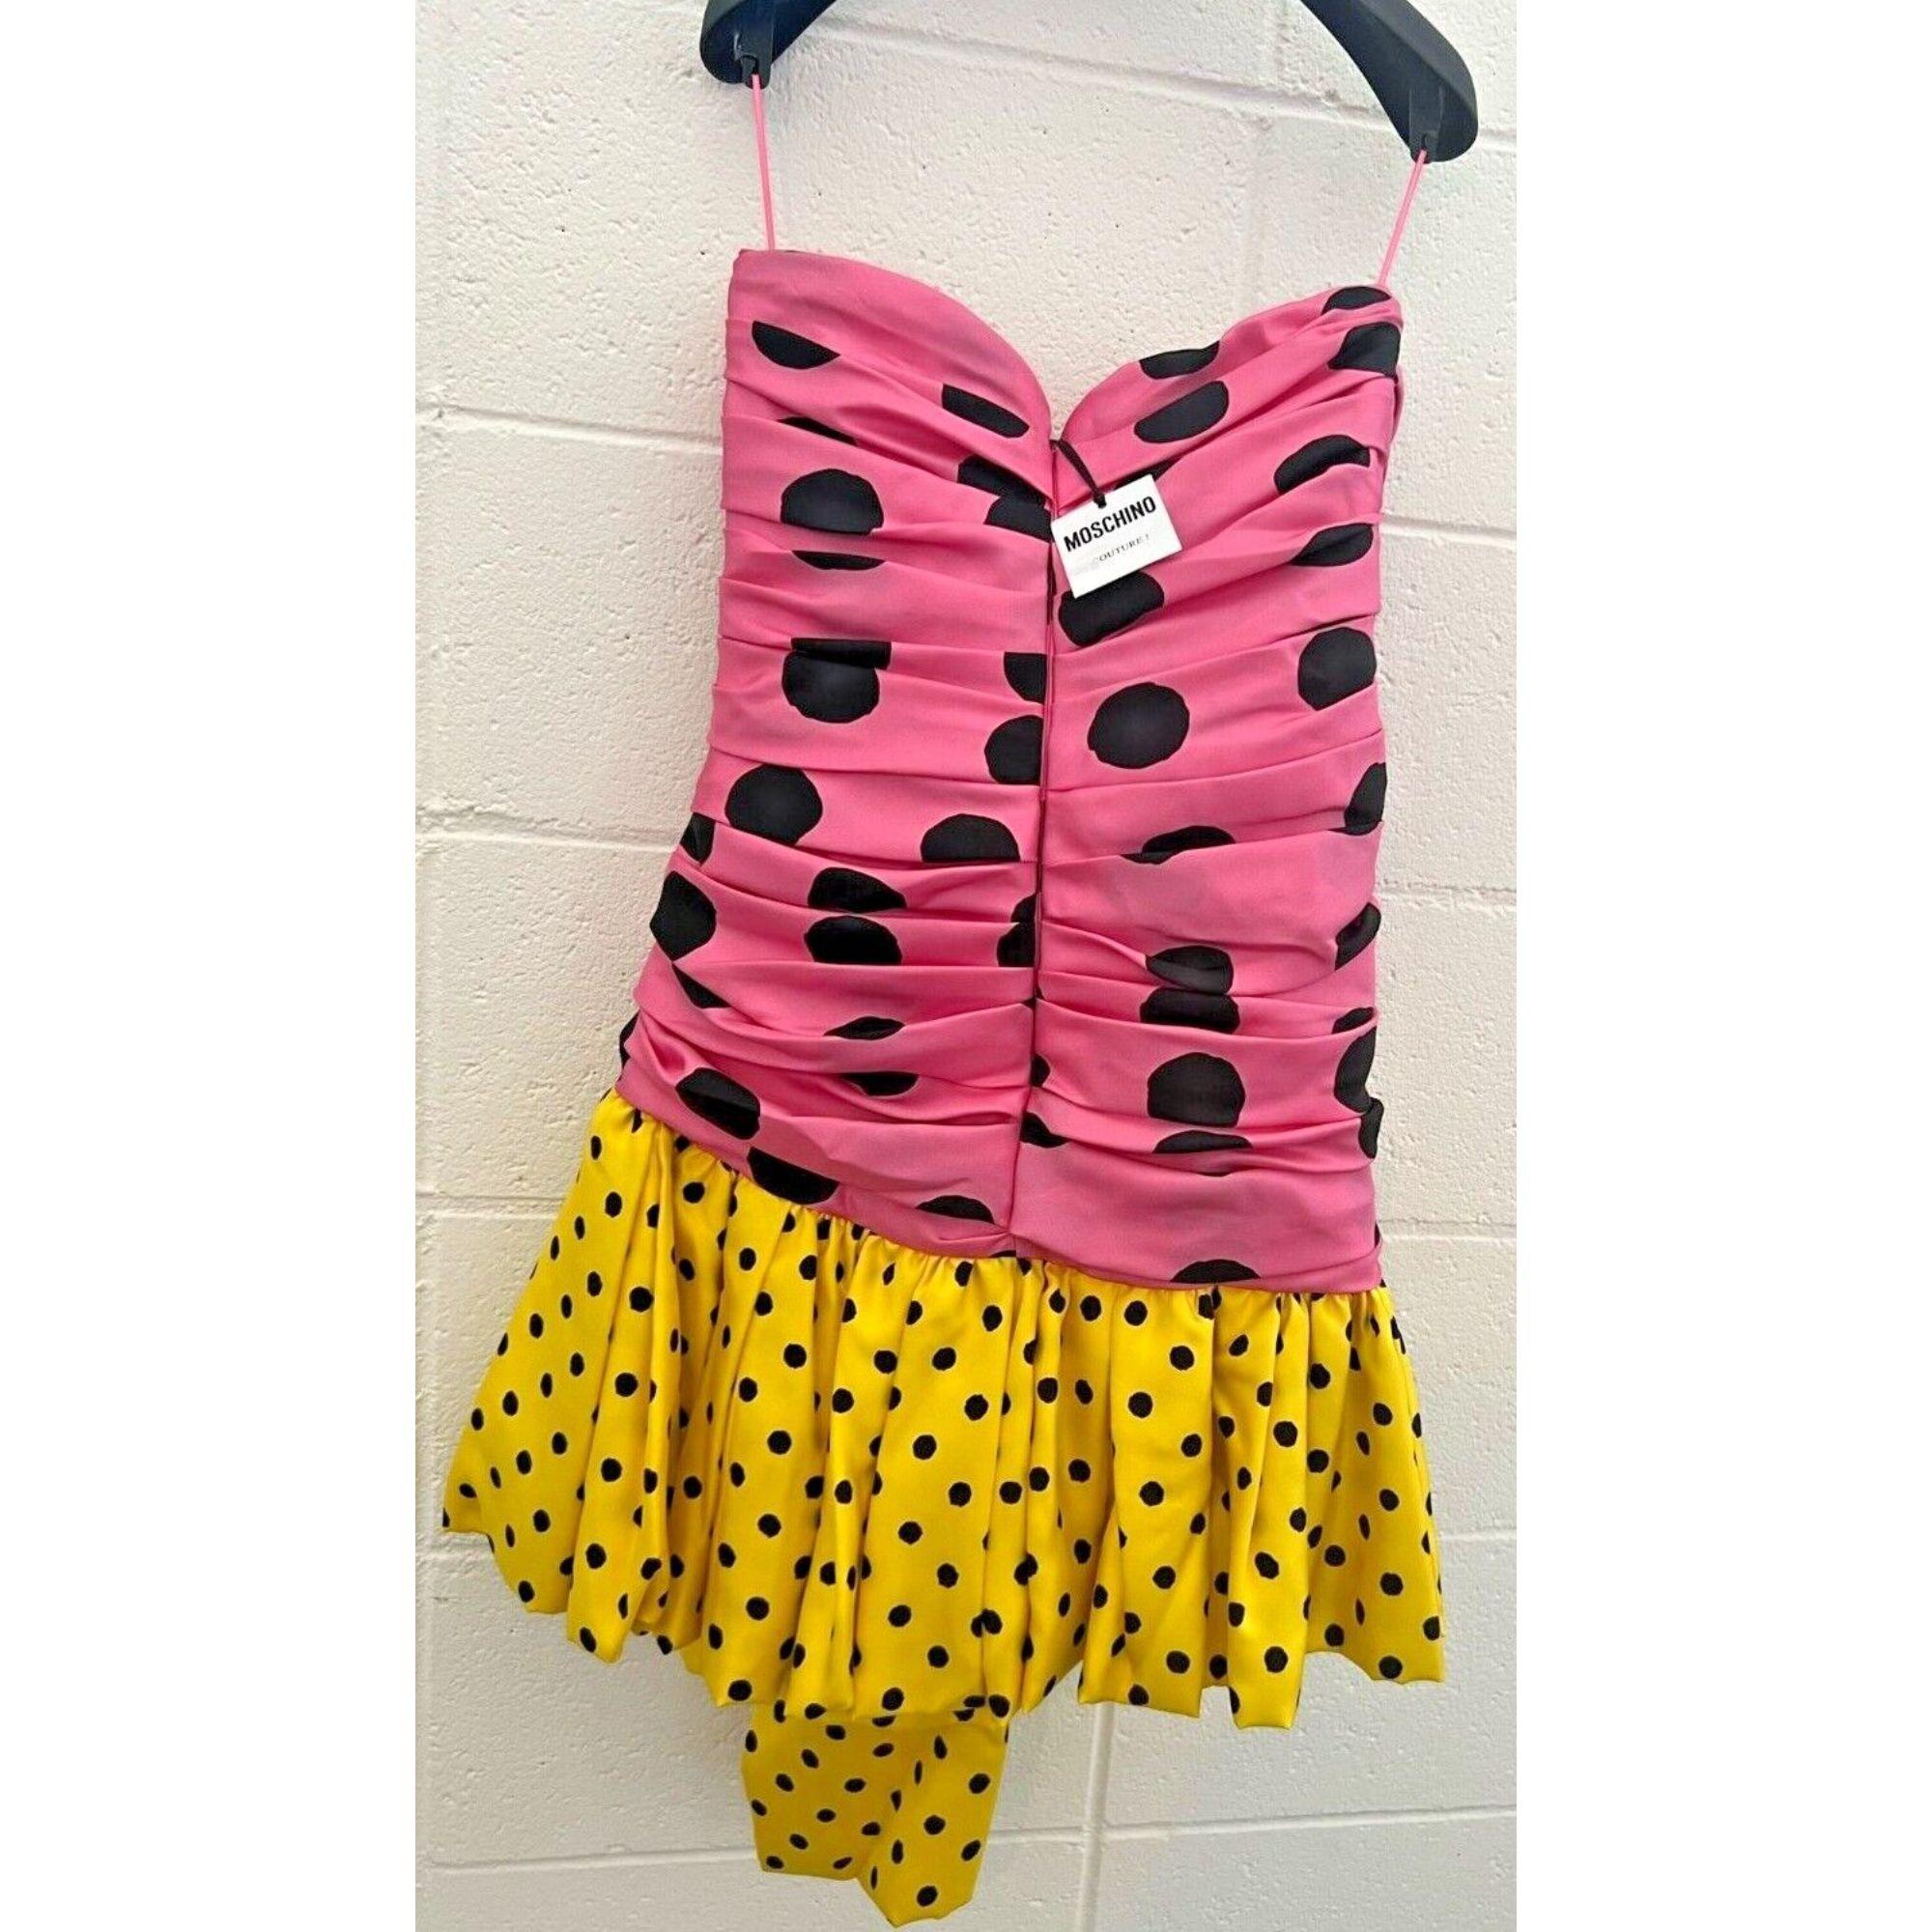 SS21 Moschino Couture Pink Yellow Strapless Polka Dot Mini Dress by Jeremy Scott For Sale 1